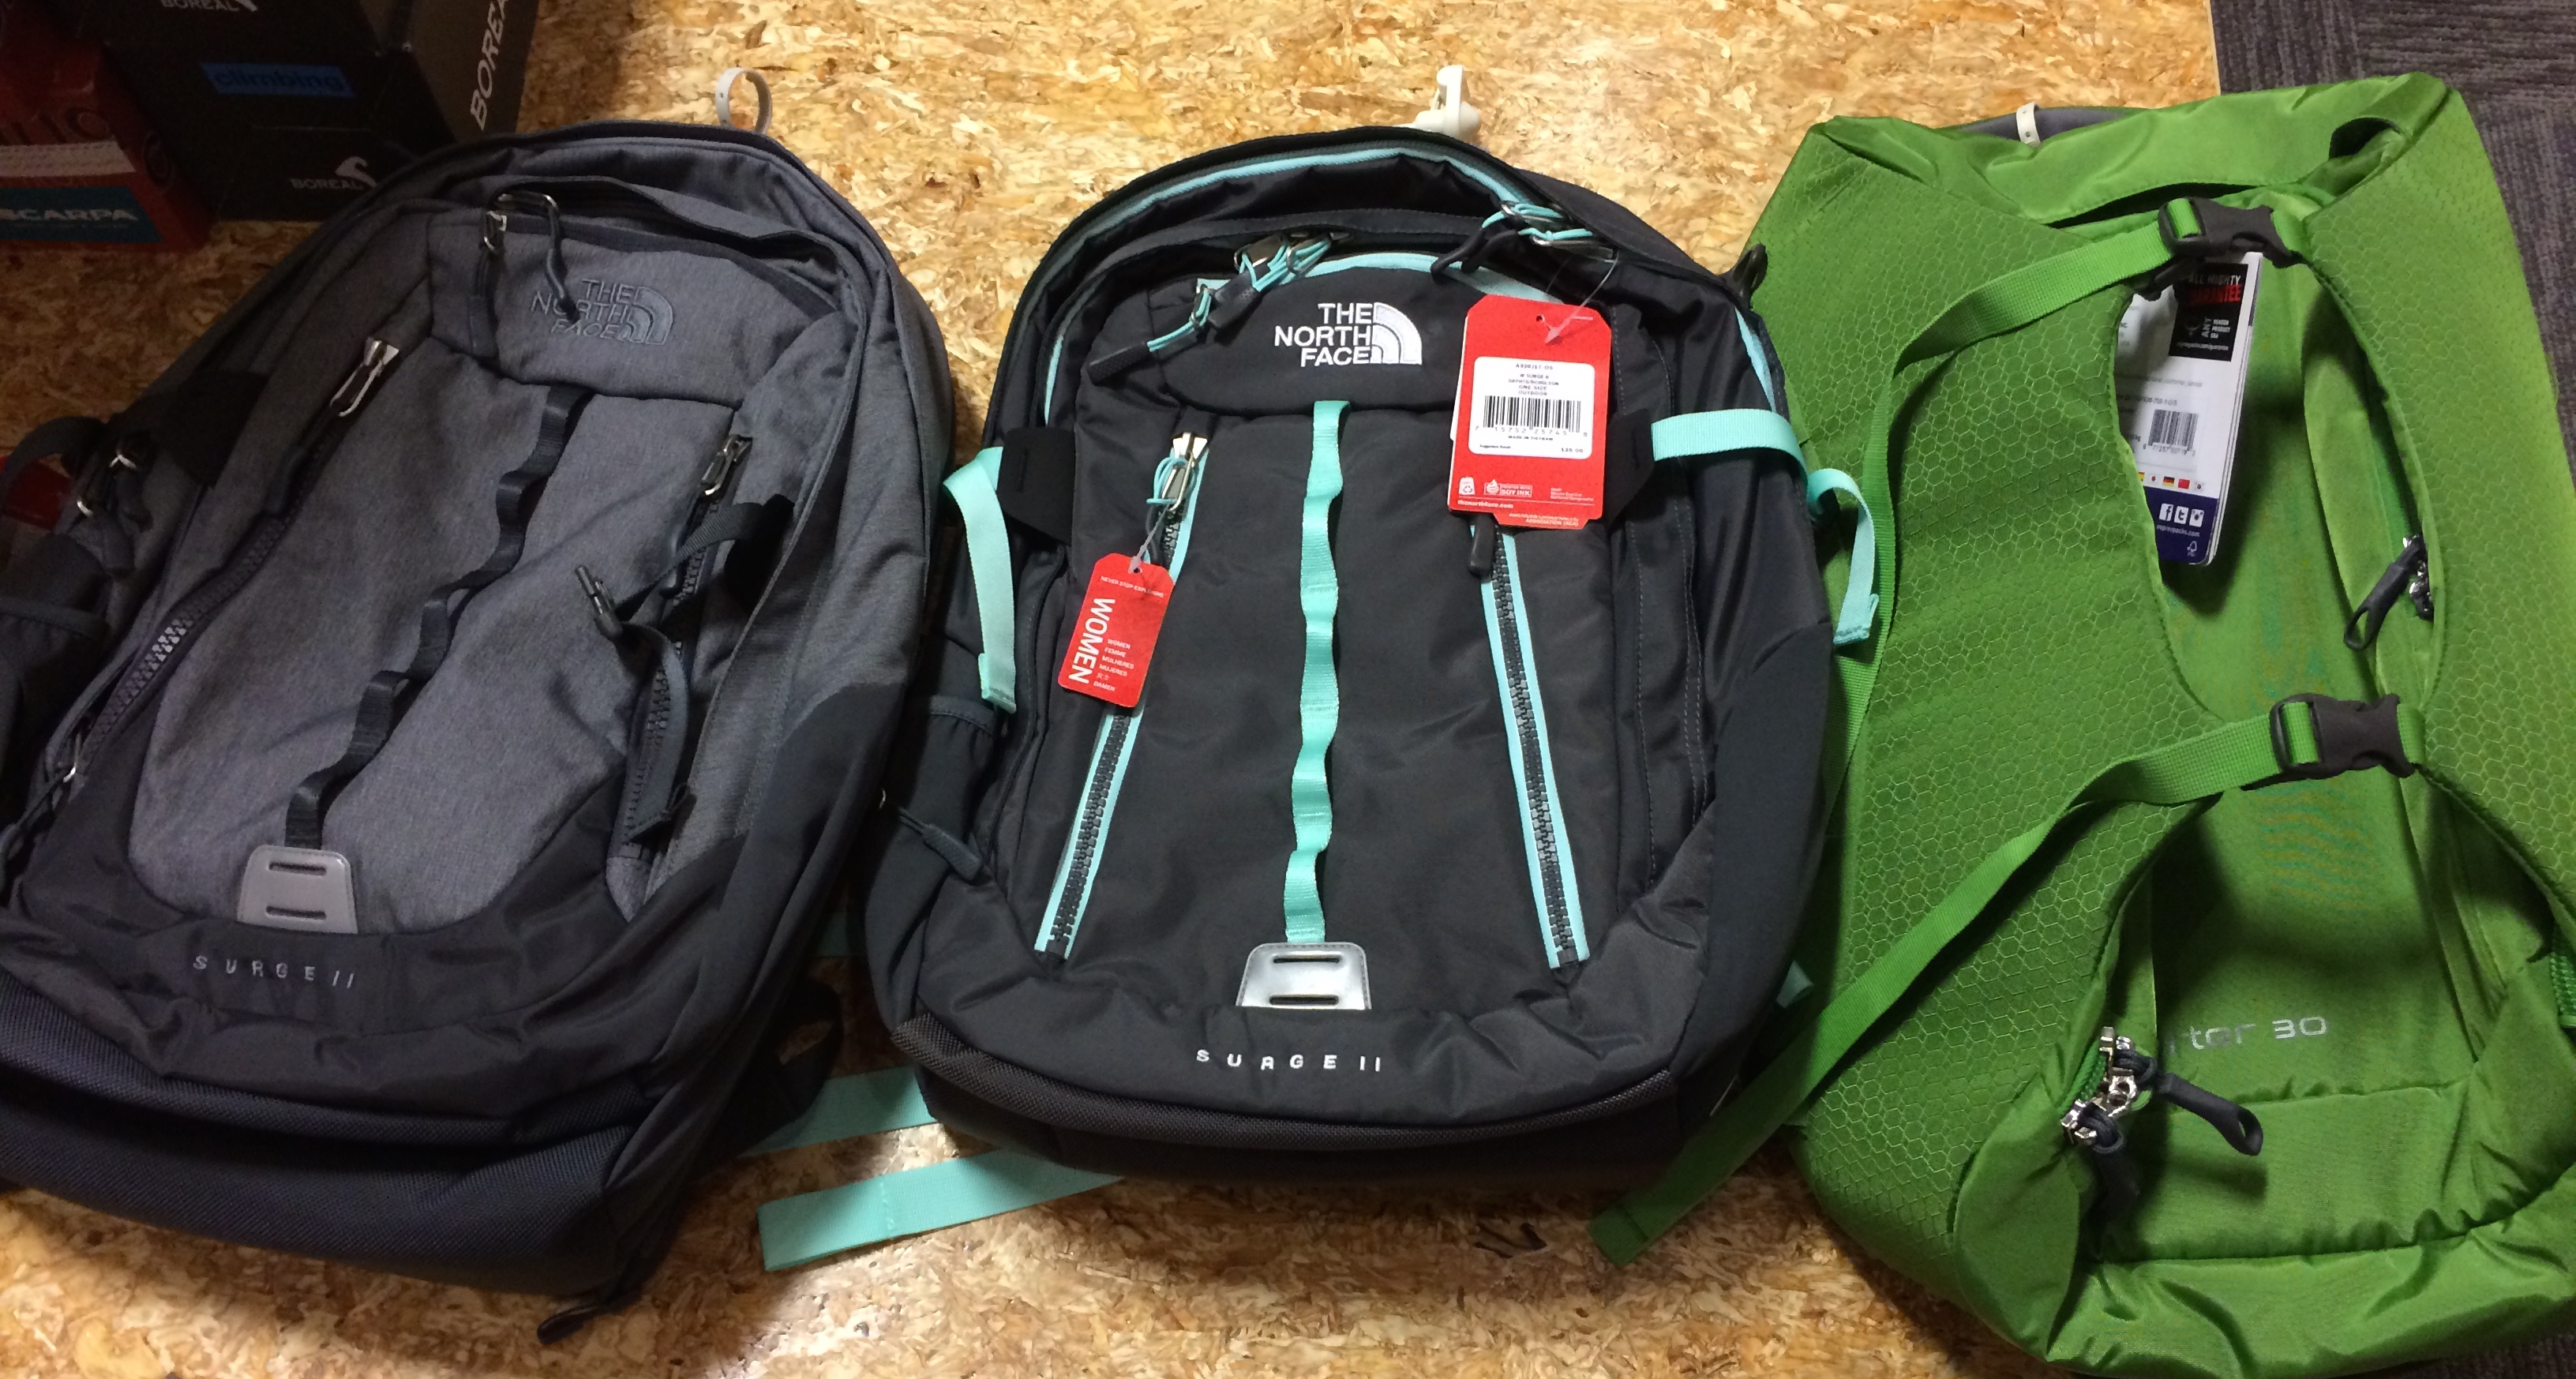 north face one bag reviews